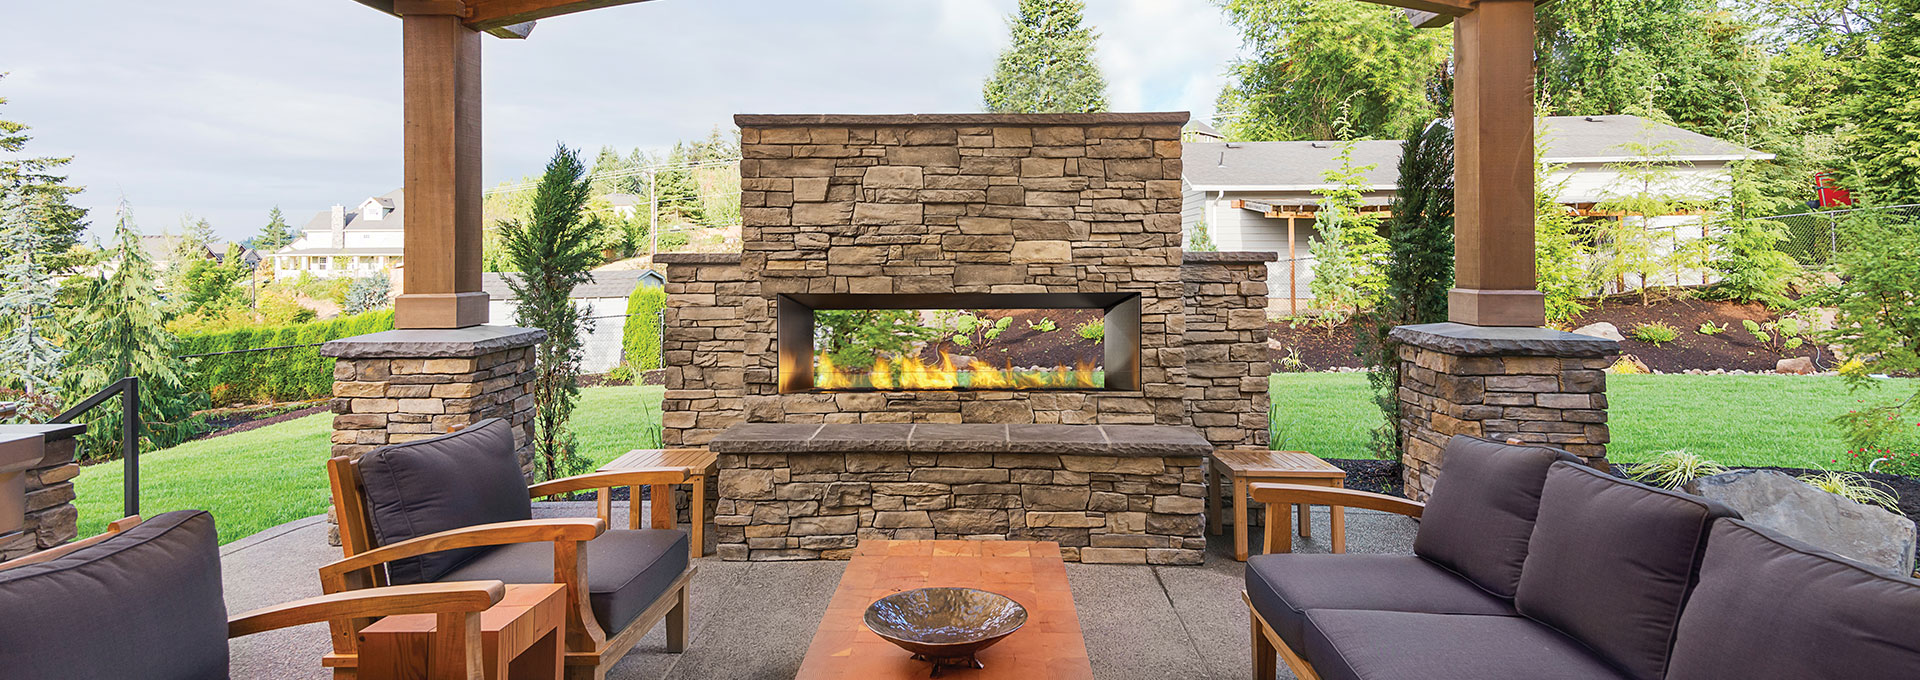 Outdoor Gas Fireplaces Fireplace Kits, Outdoor Gas Fire Pit Chimney